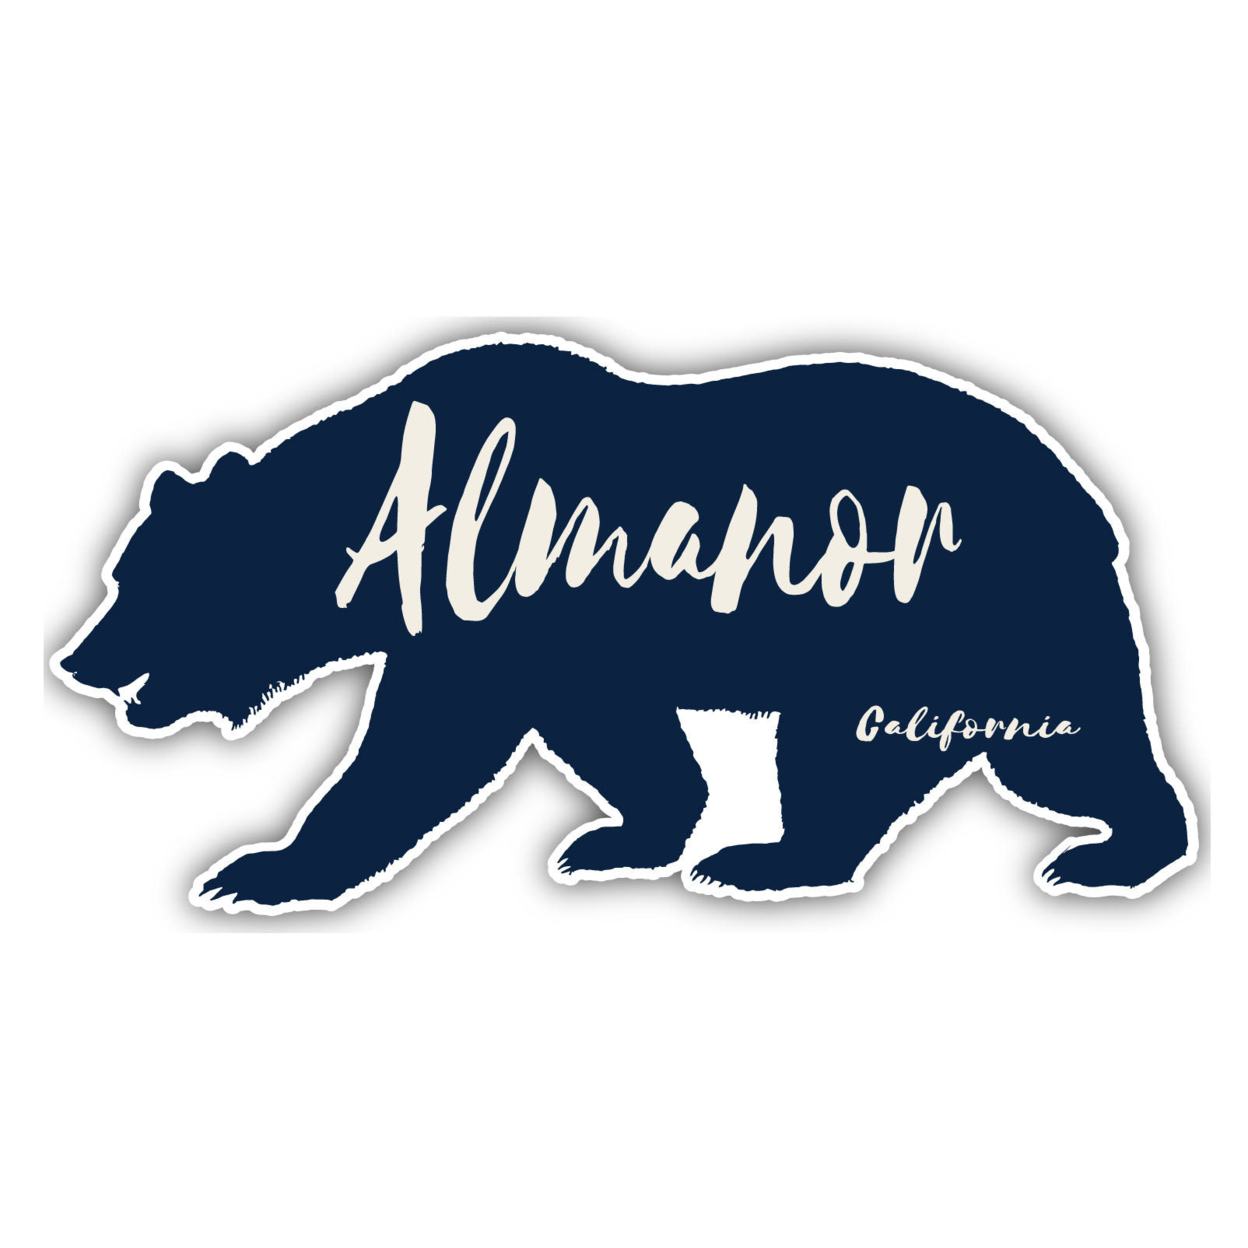 Almanor California Souvenir Decorative Stickers (Choose Theme And Size) - 4-Pack, 12-Inch, Tent